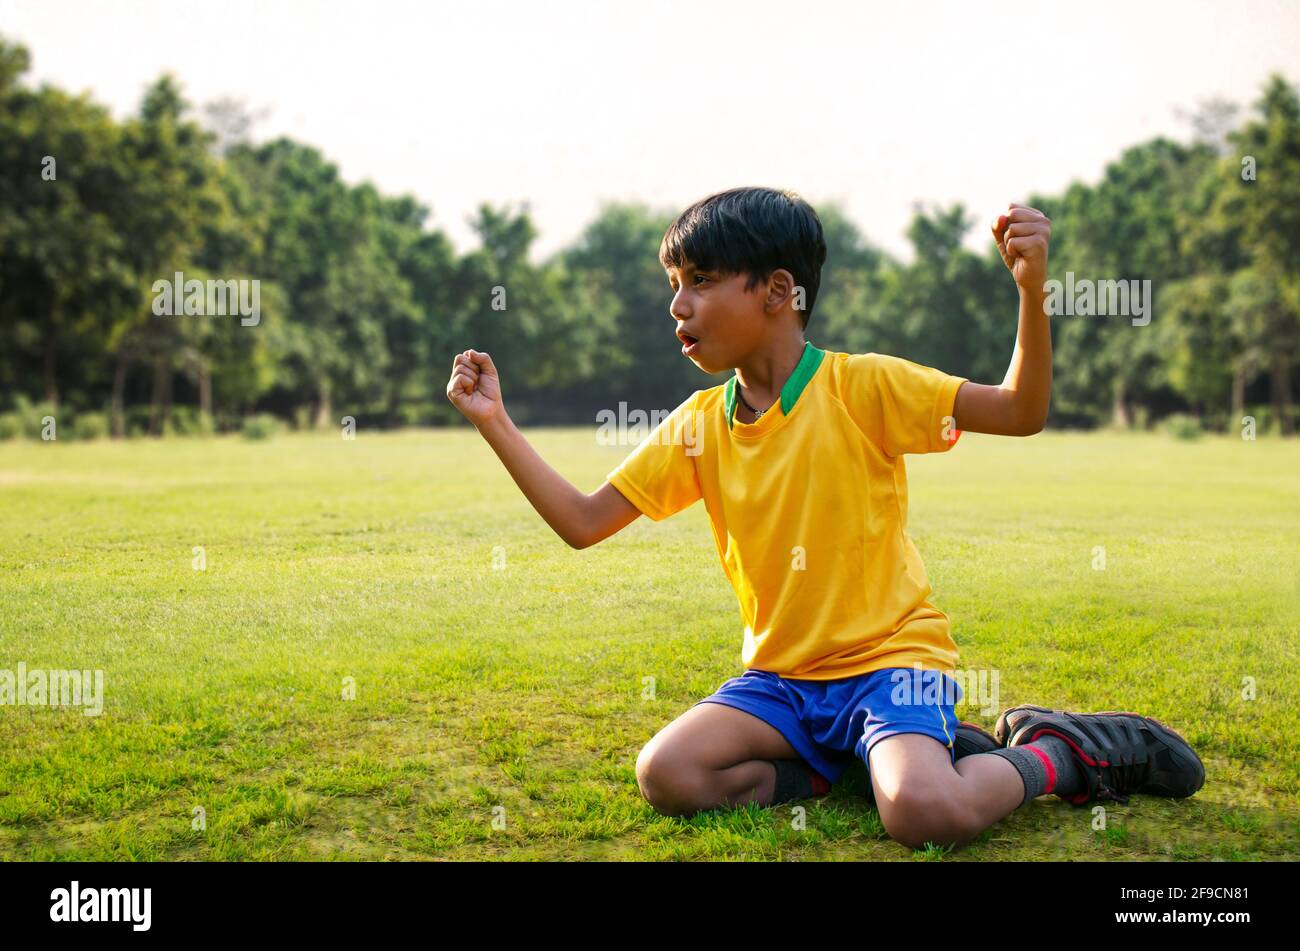 Full Length of Excited boy football player after goal scored Stock Photo